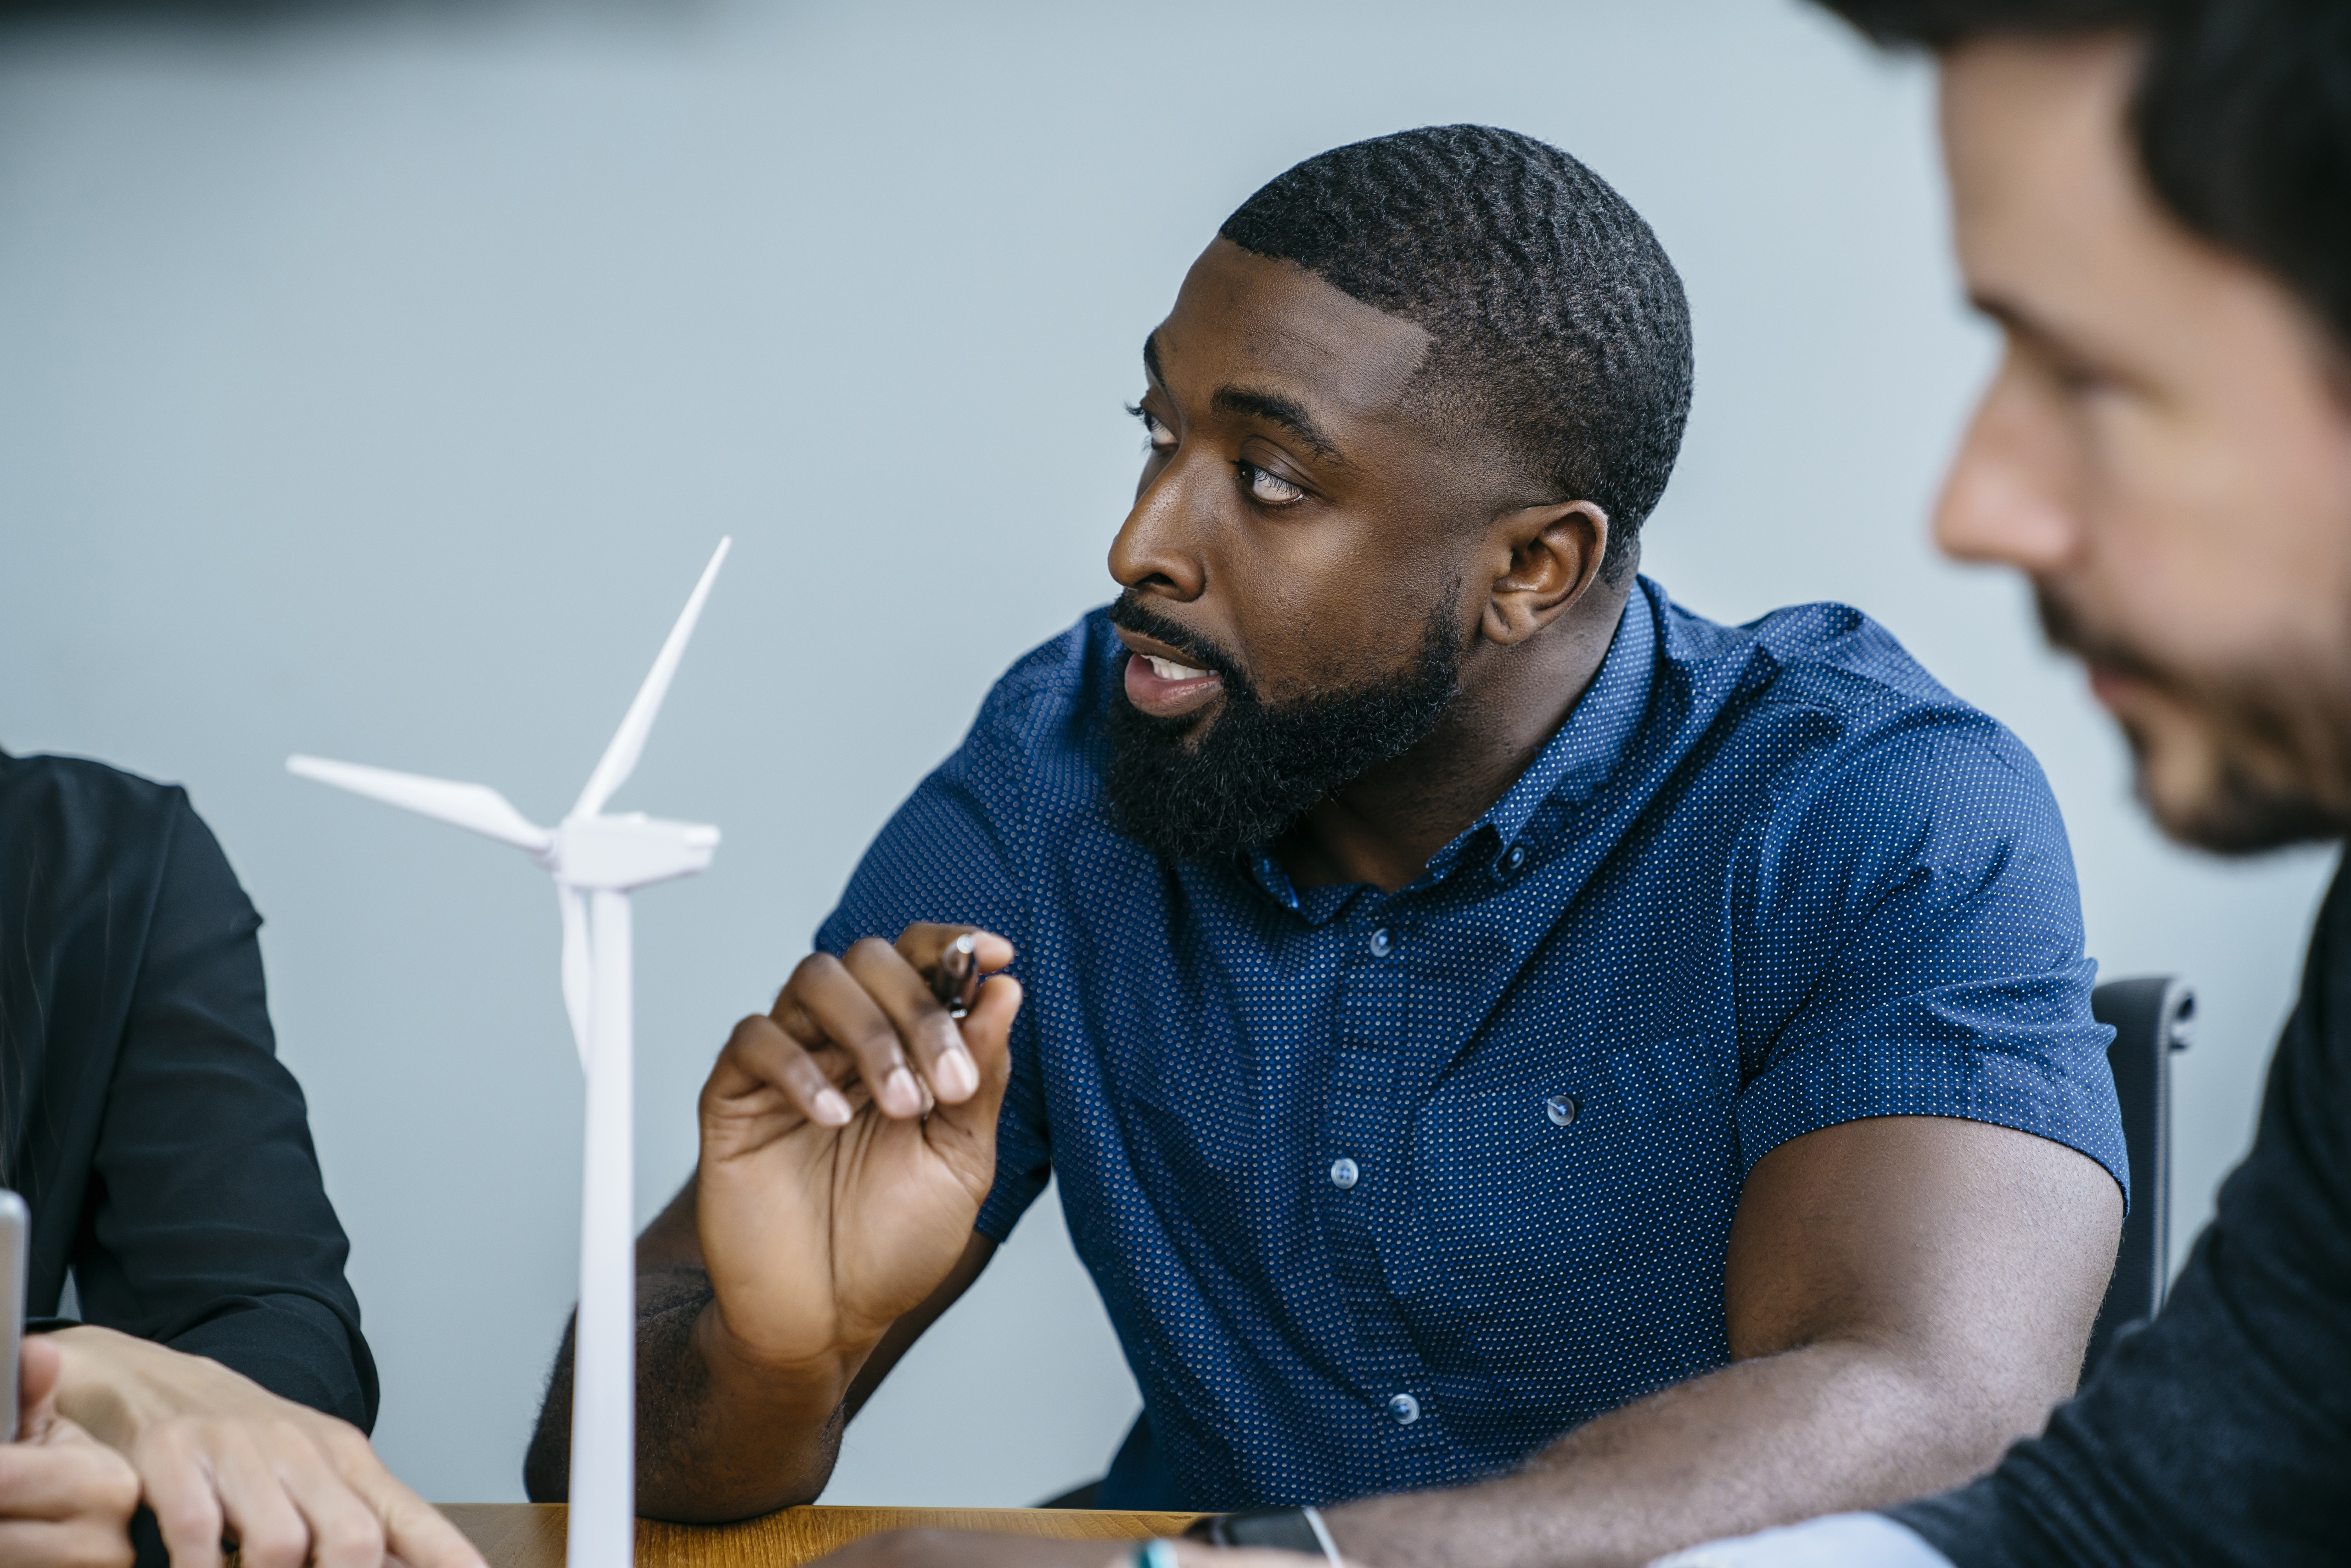 Man in discussion with miniature wind farm